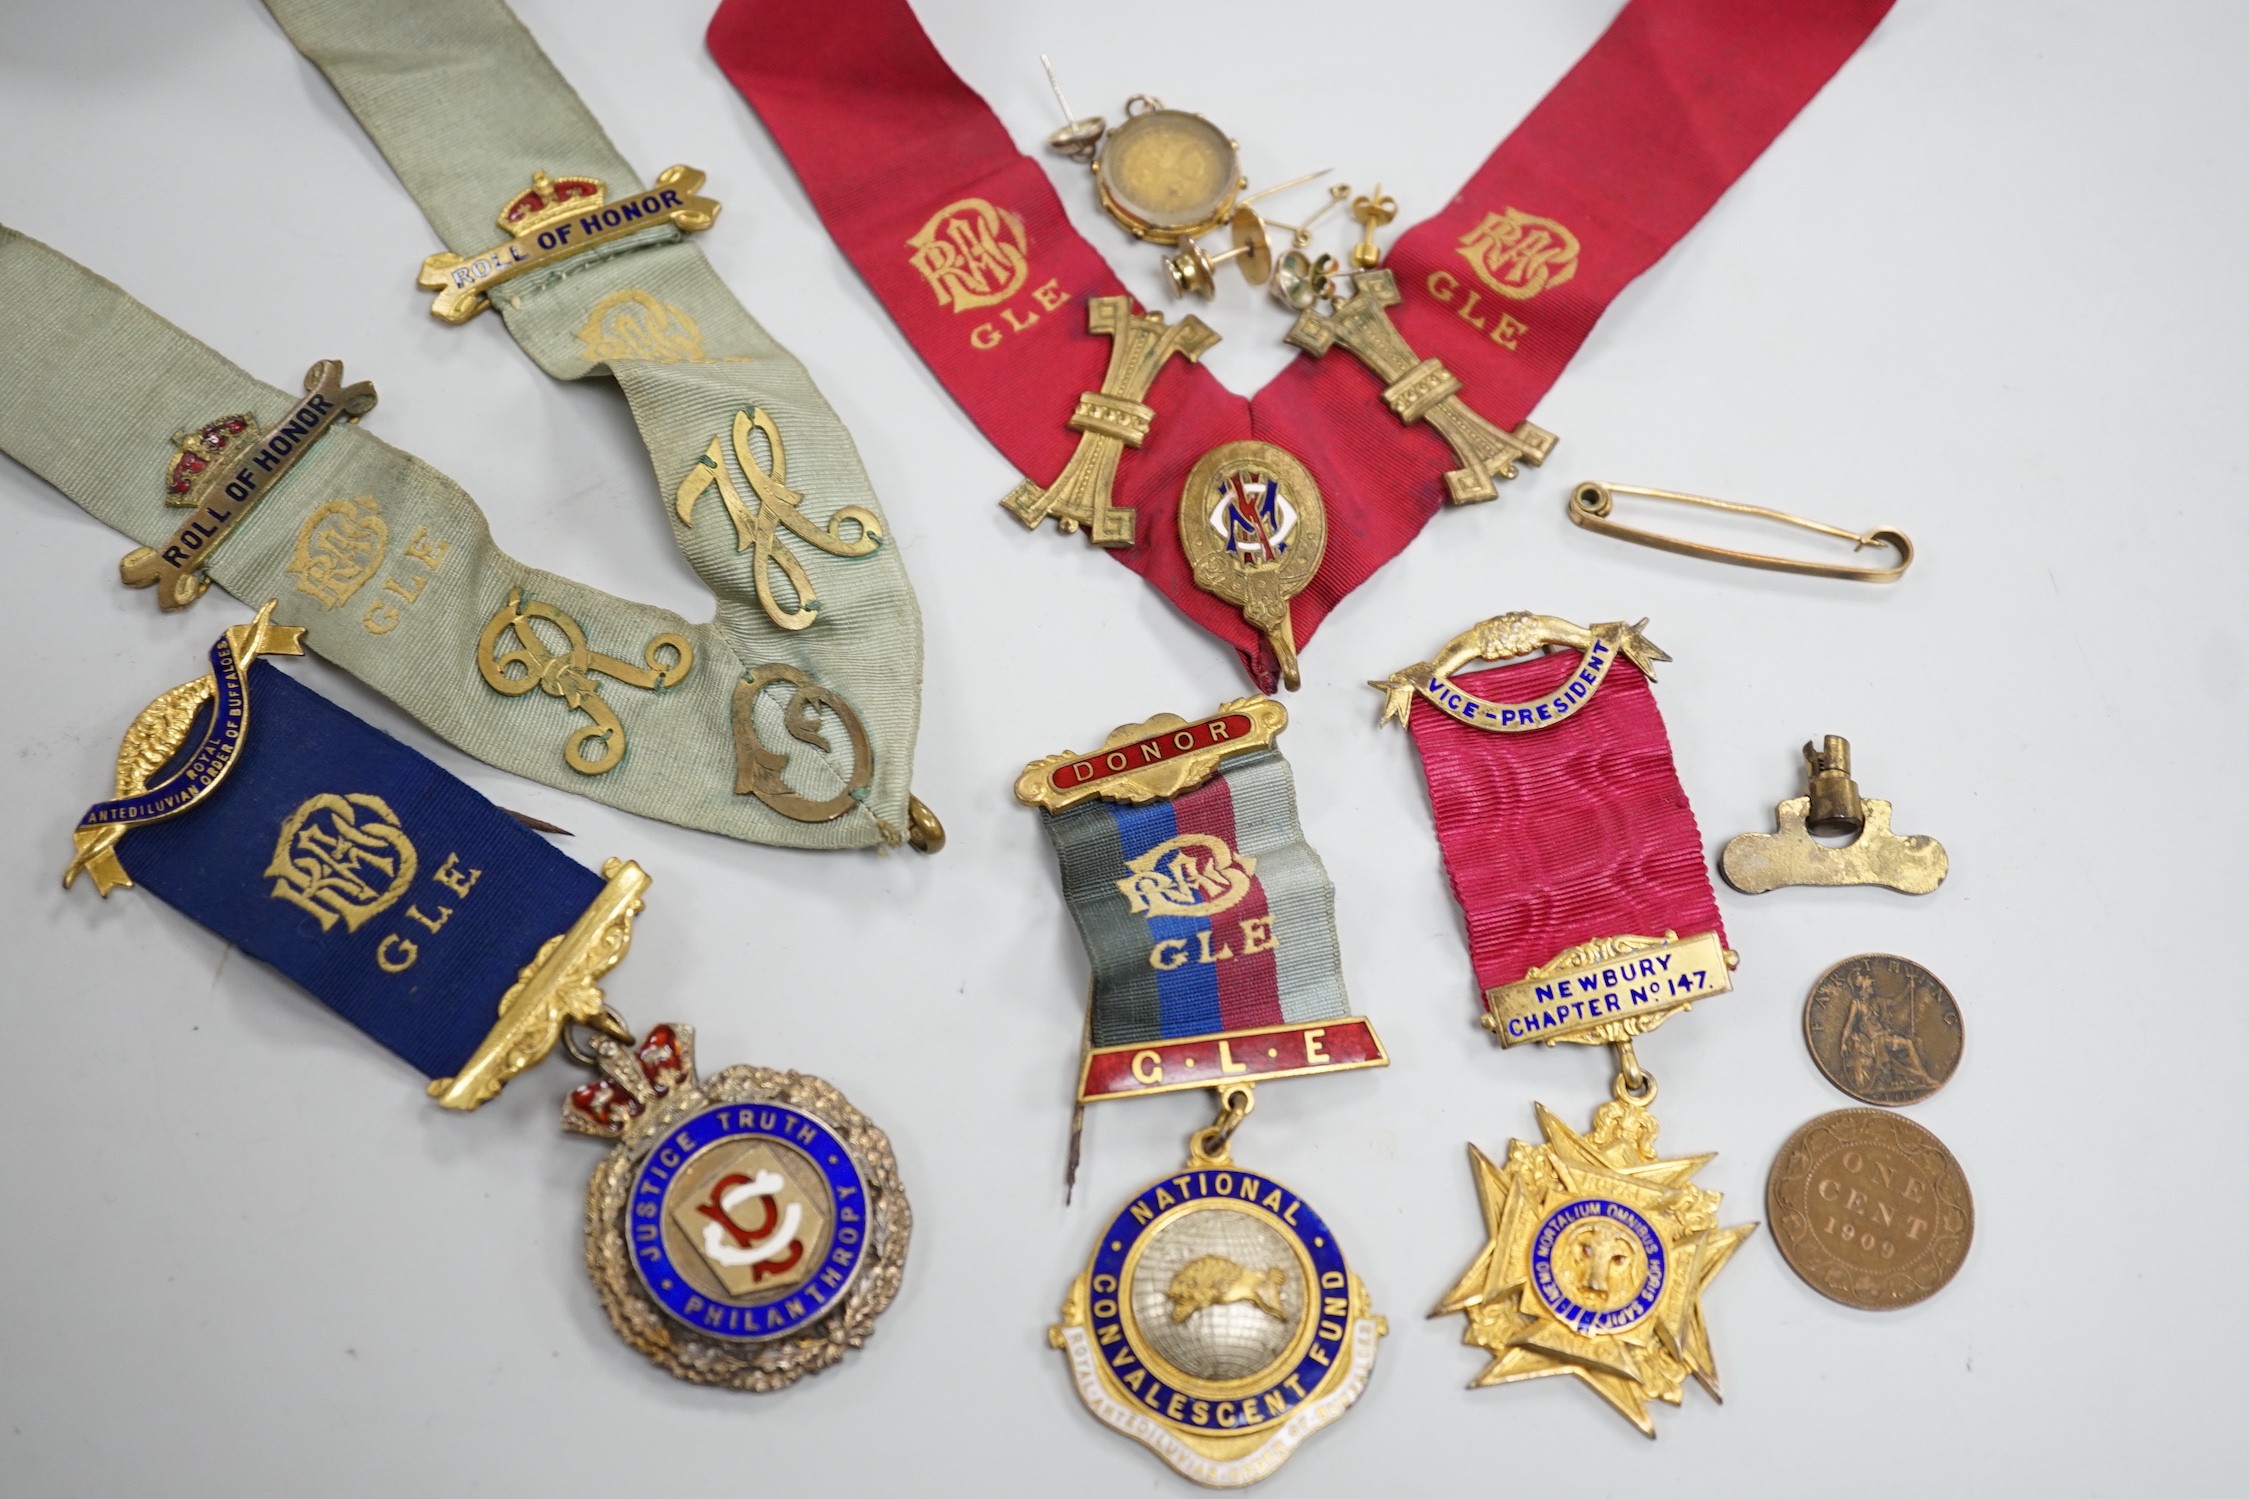 Sundry jewellery and medallions, including two silver-gilt Masonic medals etc.